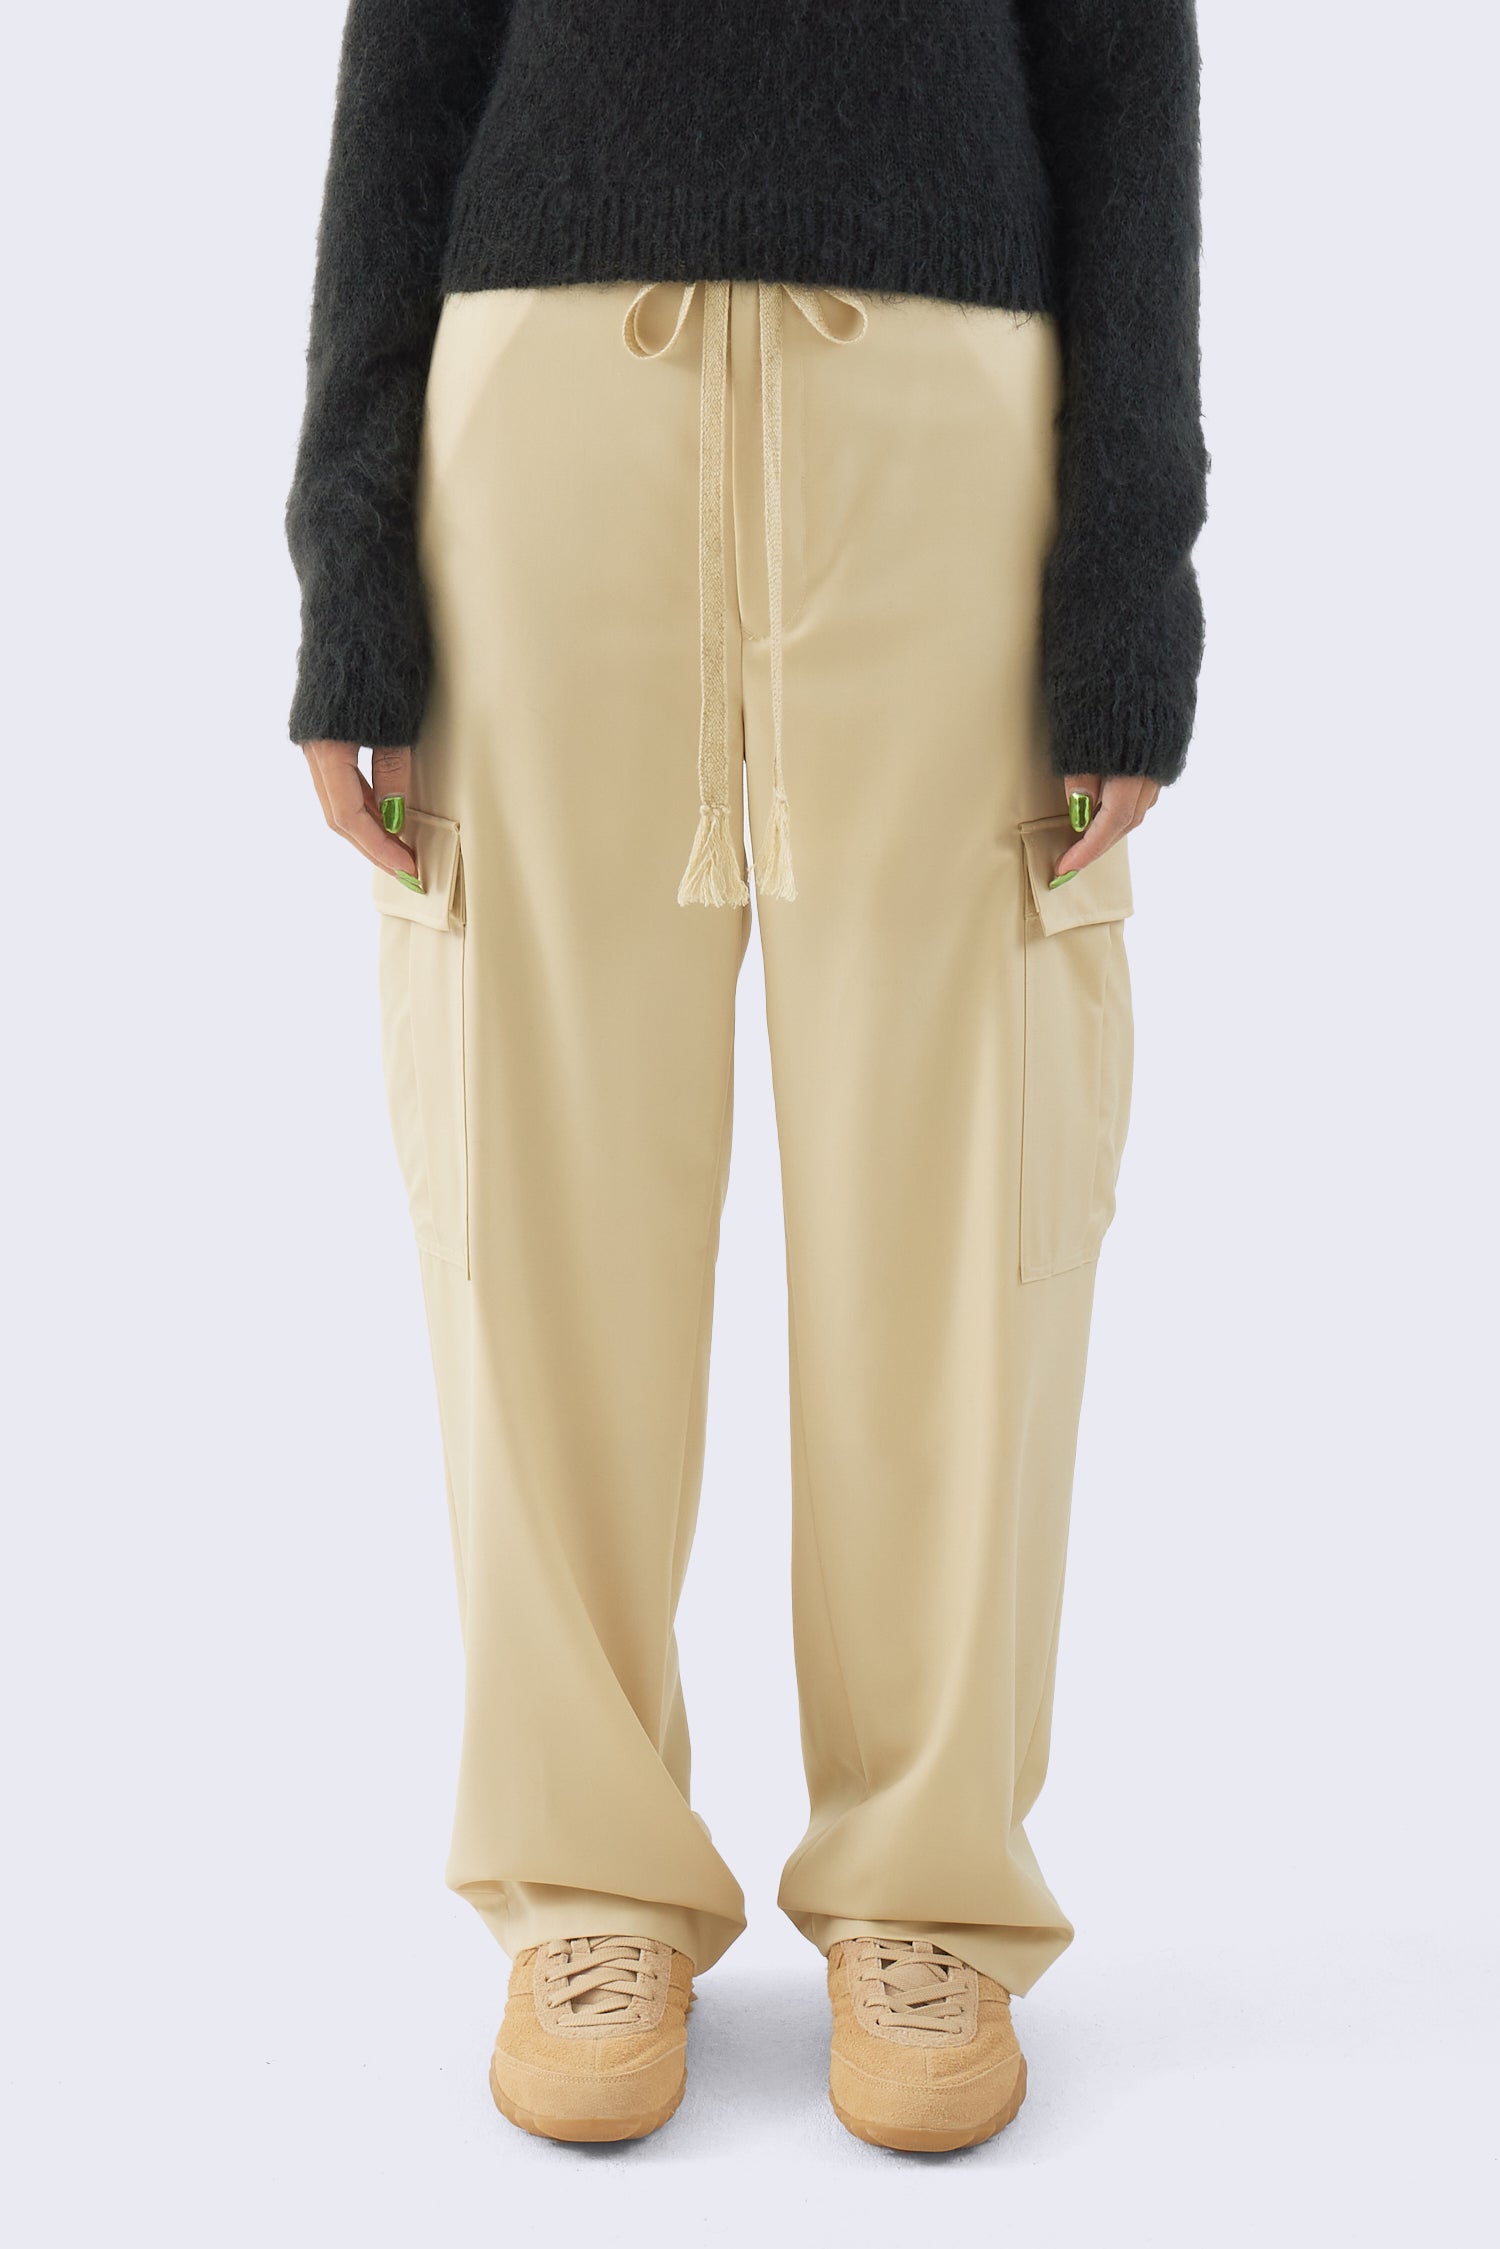 Westbourne Wool-Twill Pants - Ivory, Charcoal and Blue Pow